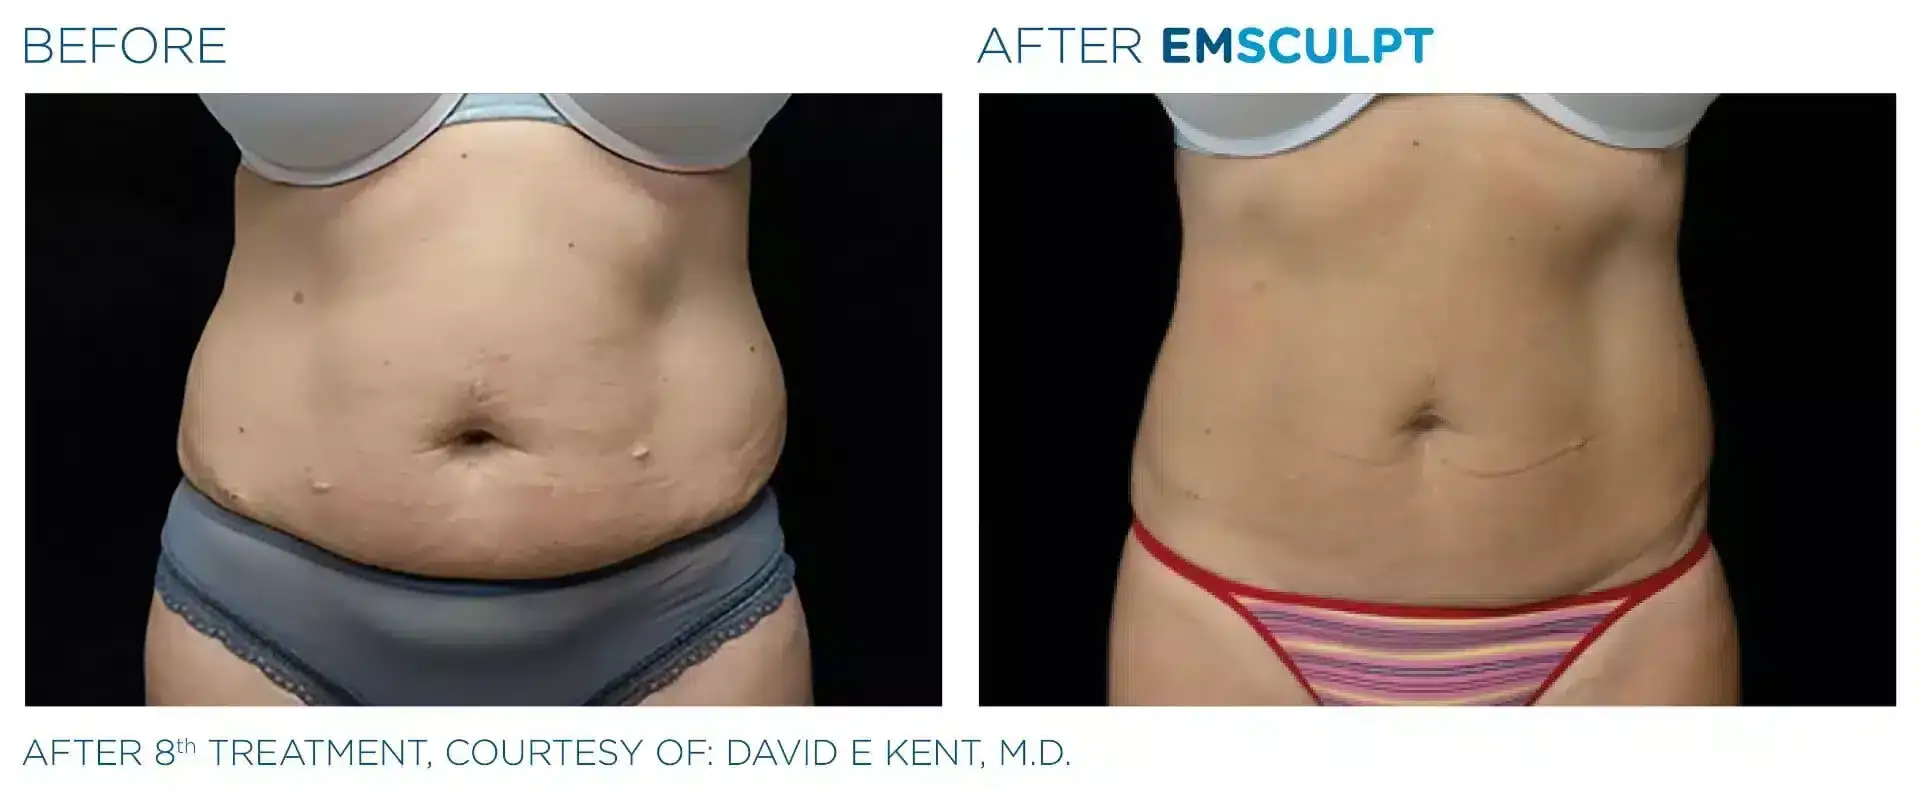 EMSCULPT BEFORE AND AFTER | REAL PATIENT RESULTS